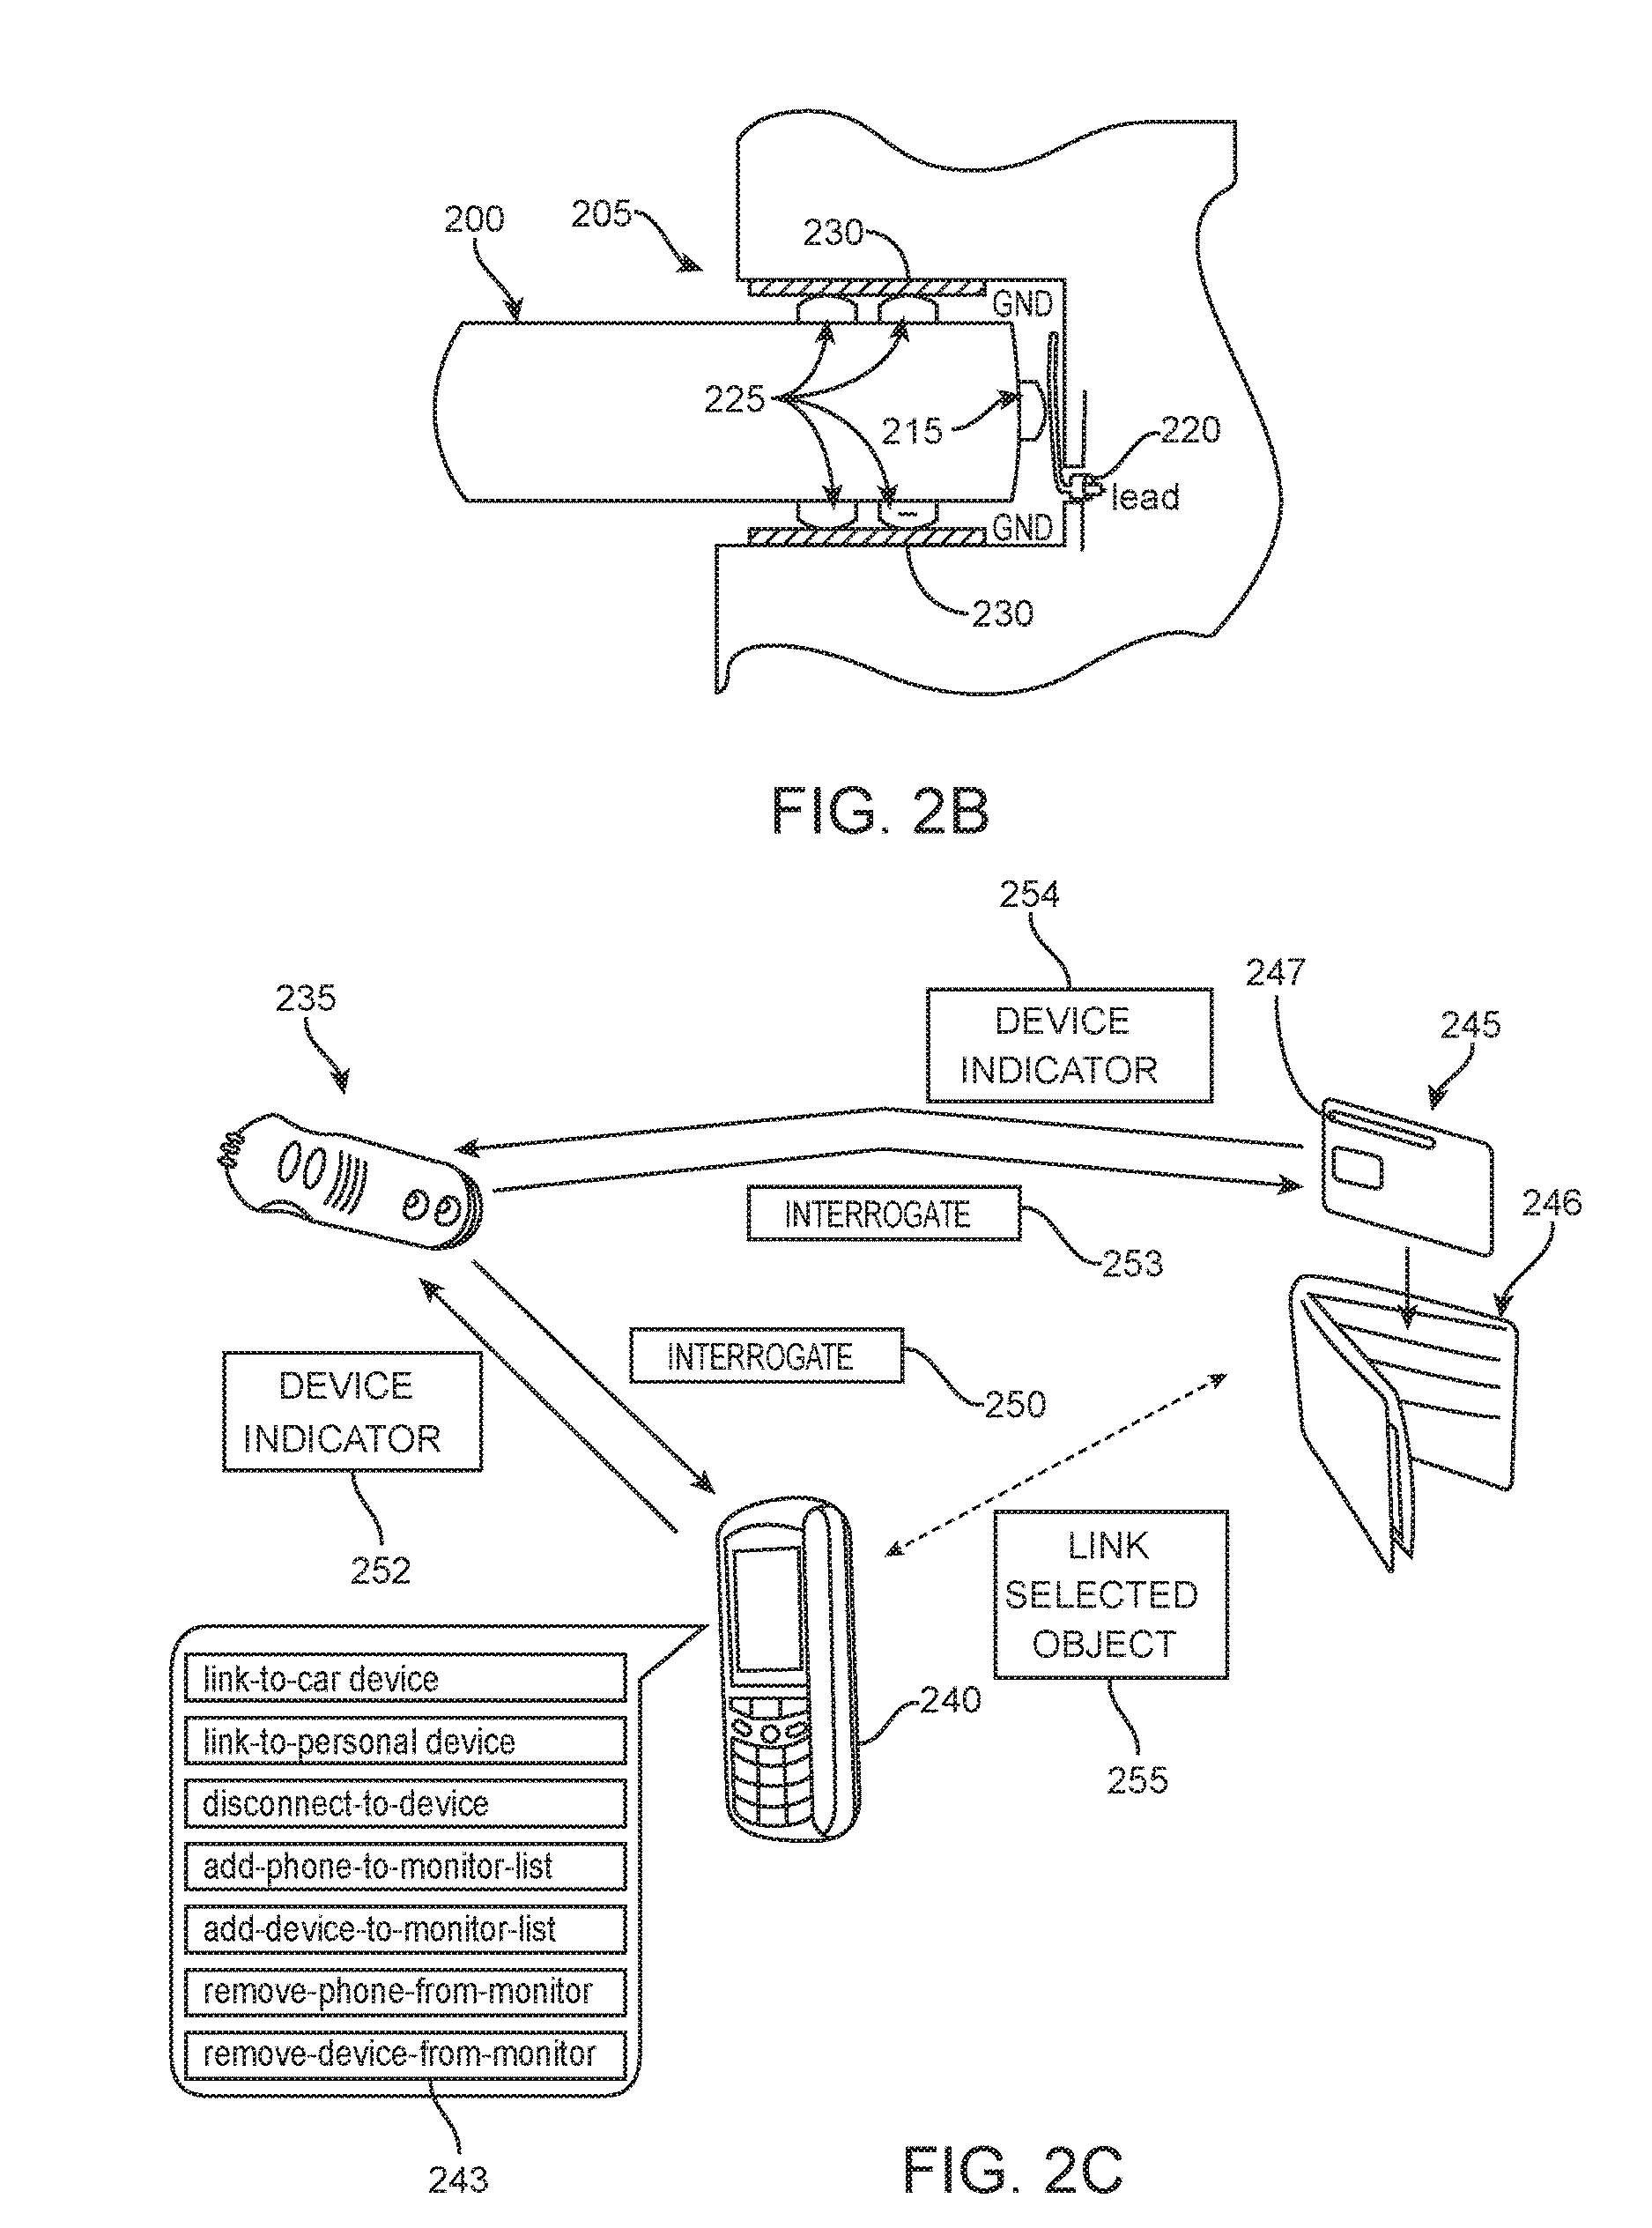 Method and device to set household parameters based on the movement of items